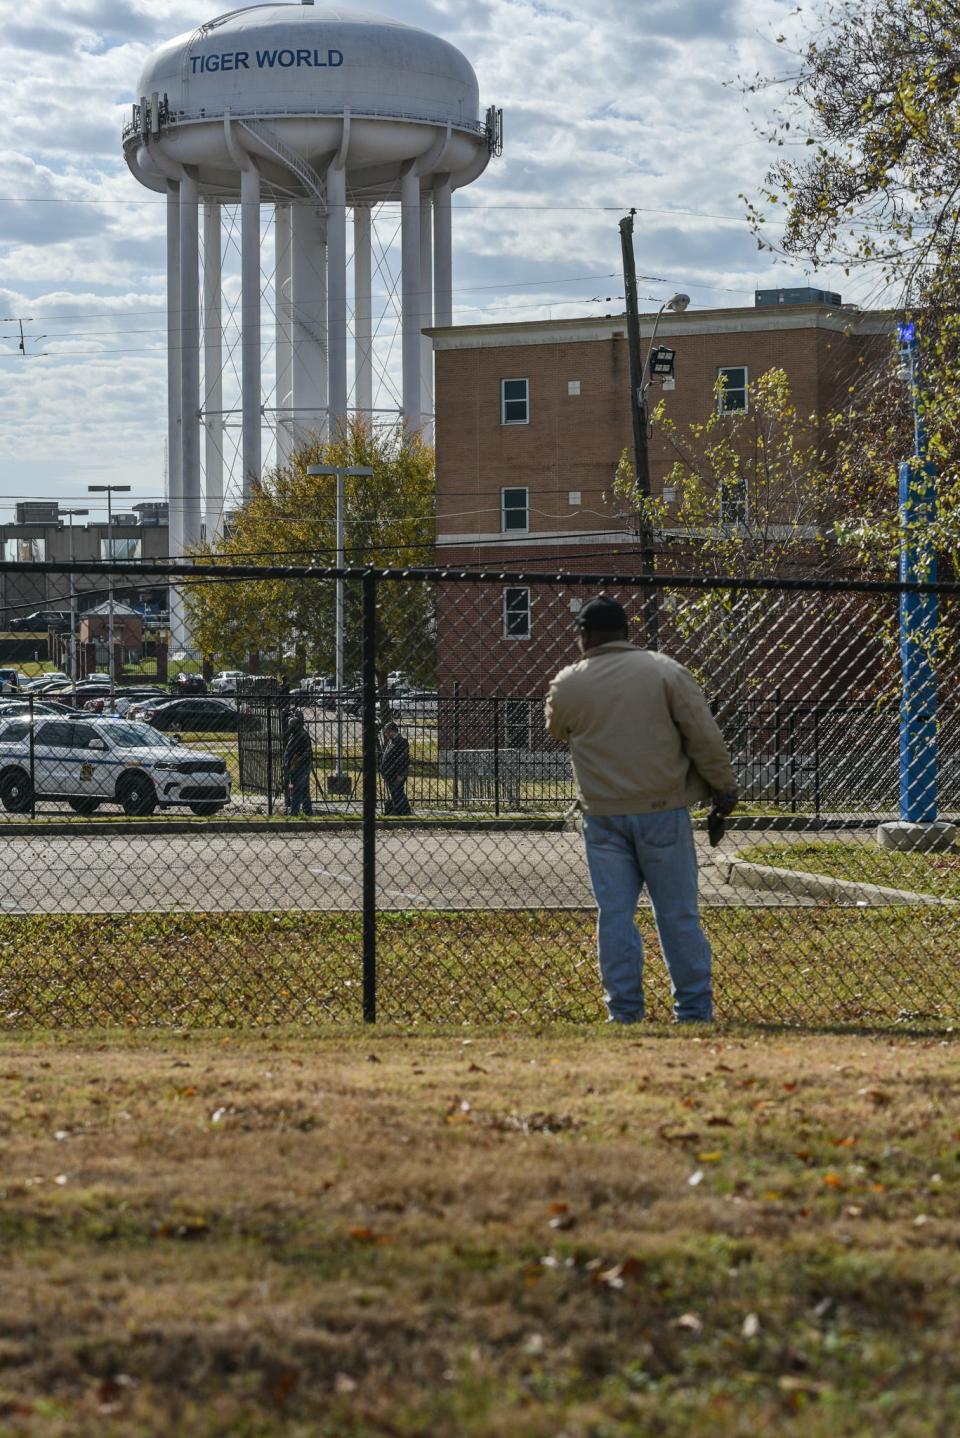 A passerby stops to investigate as officials from the Hinds County Coroner's Department load a body into a Coroner's vehicle near Dixon Hall on the Jackson State campus in Jackson, Miss., Friday, December 2, 2022. Officials from the Hinds County Coroner's Department, Hinds County Sheriff's Office, Mississippi Bureau of Investigations and Jackson State President, Thomas. Hudson, were all identified at the scene of the incident.